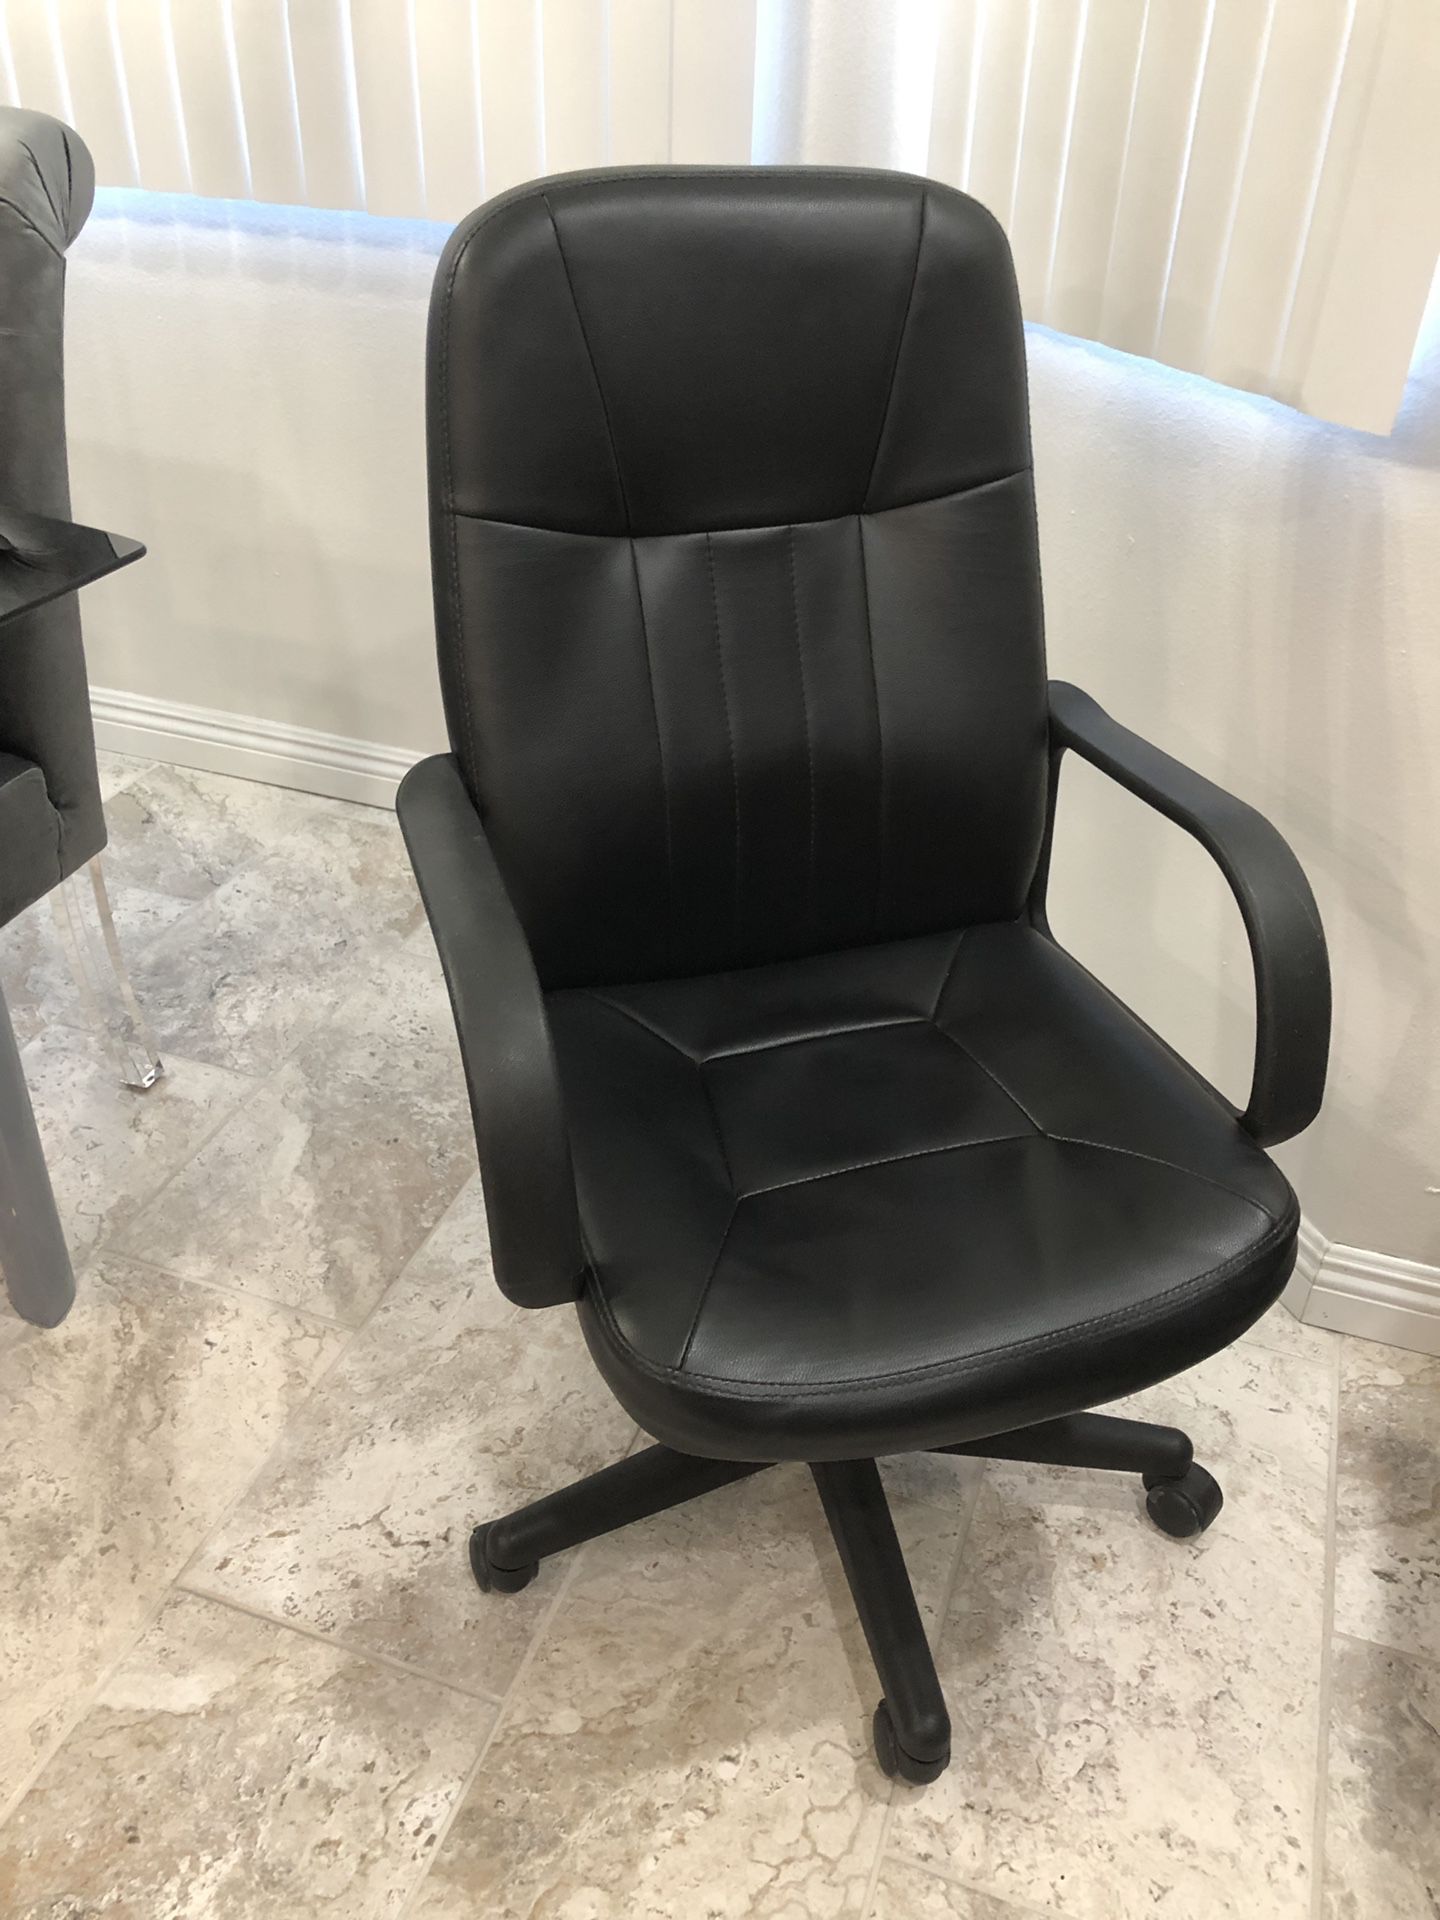 Faux Leather computer chair